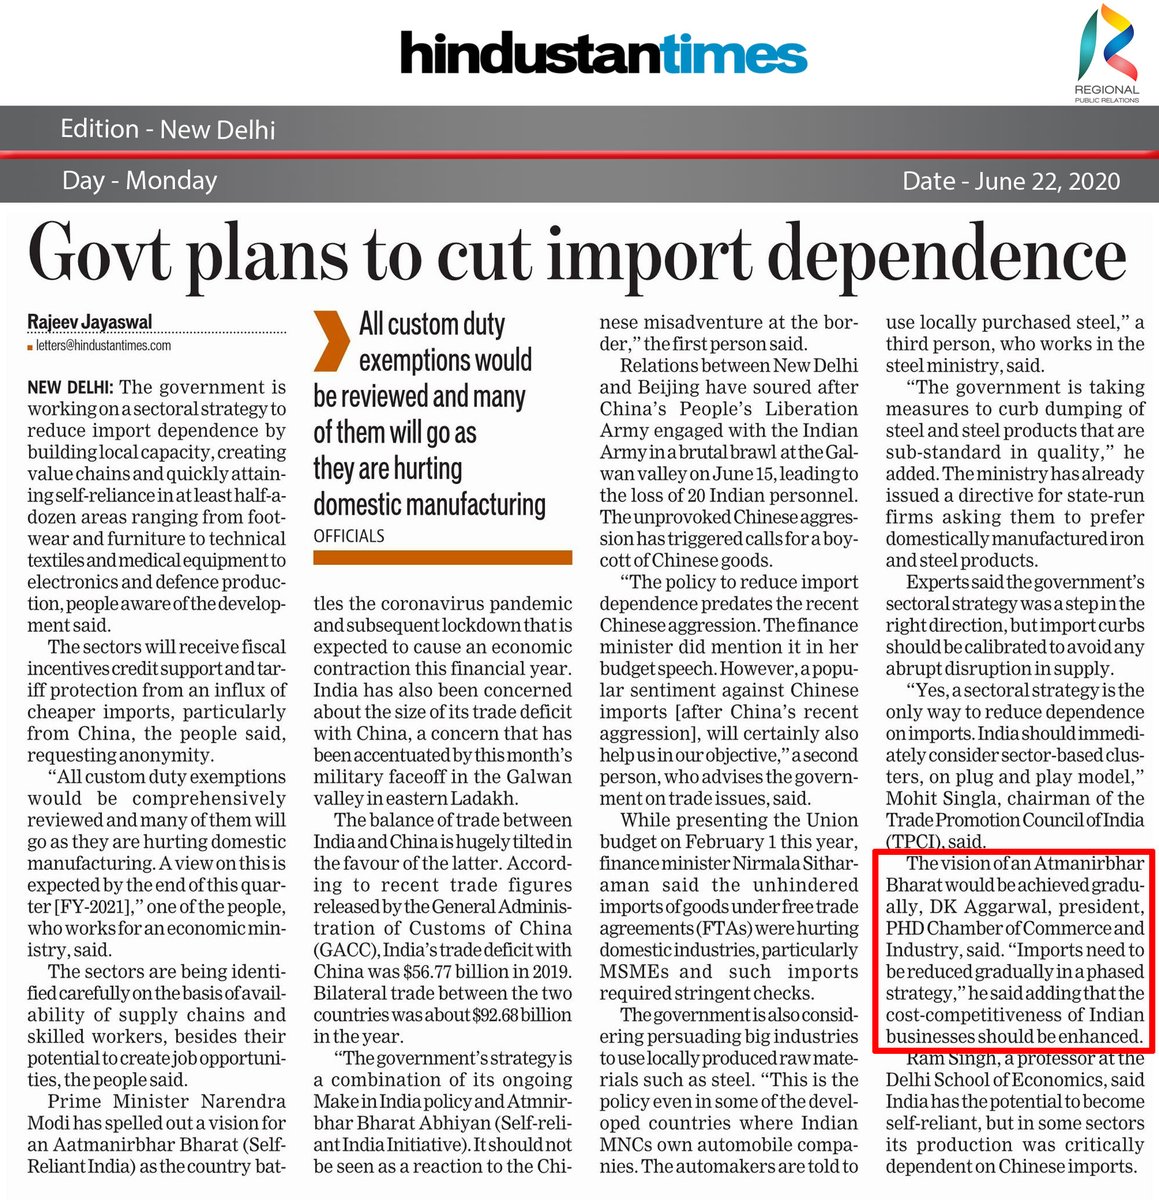 Dr. @DKAGGARWAL18 ,President, @phdchamber  gave his insightful views on #reducing #Importdependence which have been covered in Leading English Daily - Hindustan Times
@htTweets